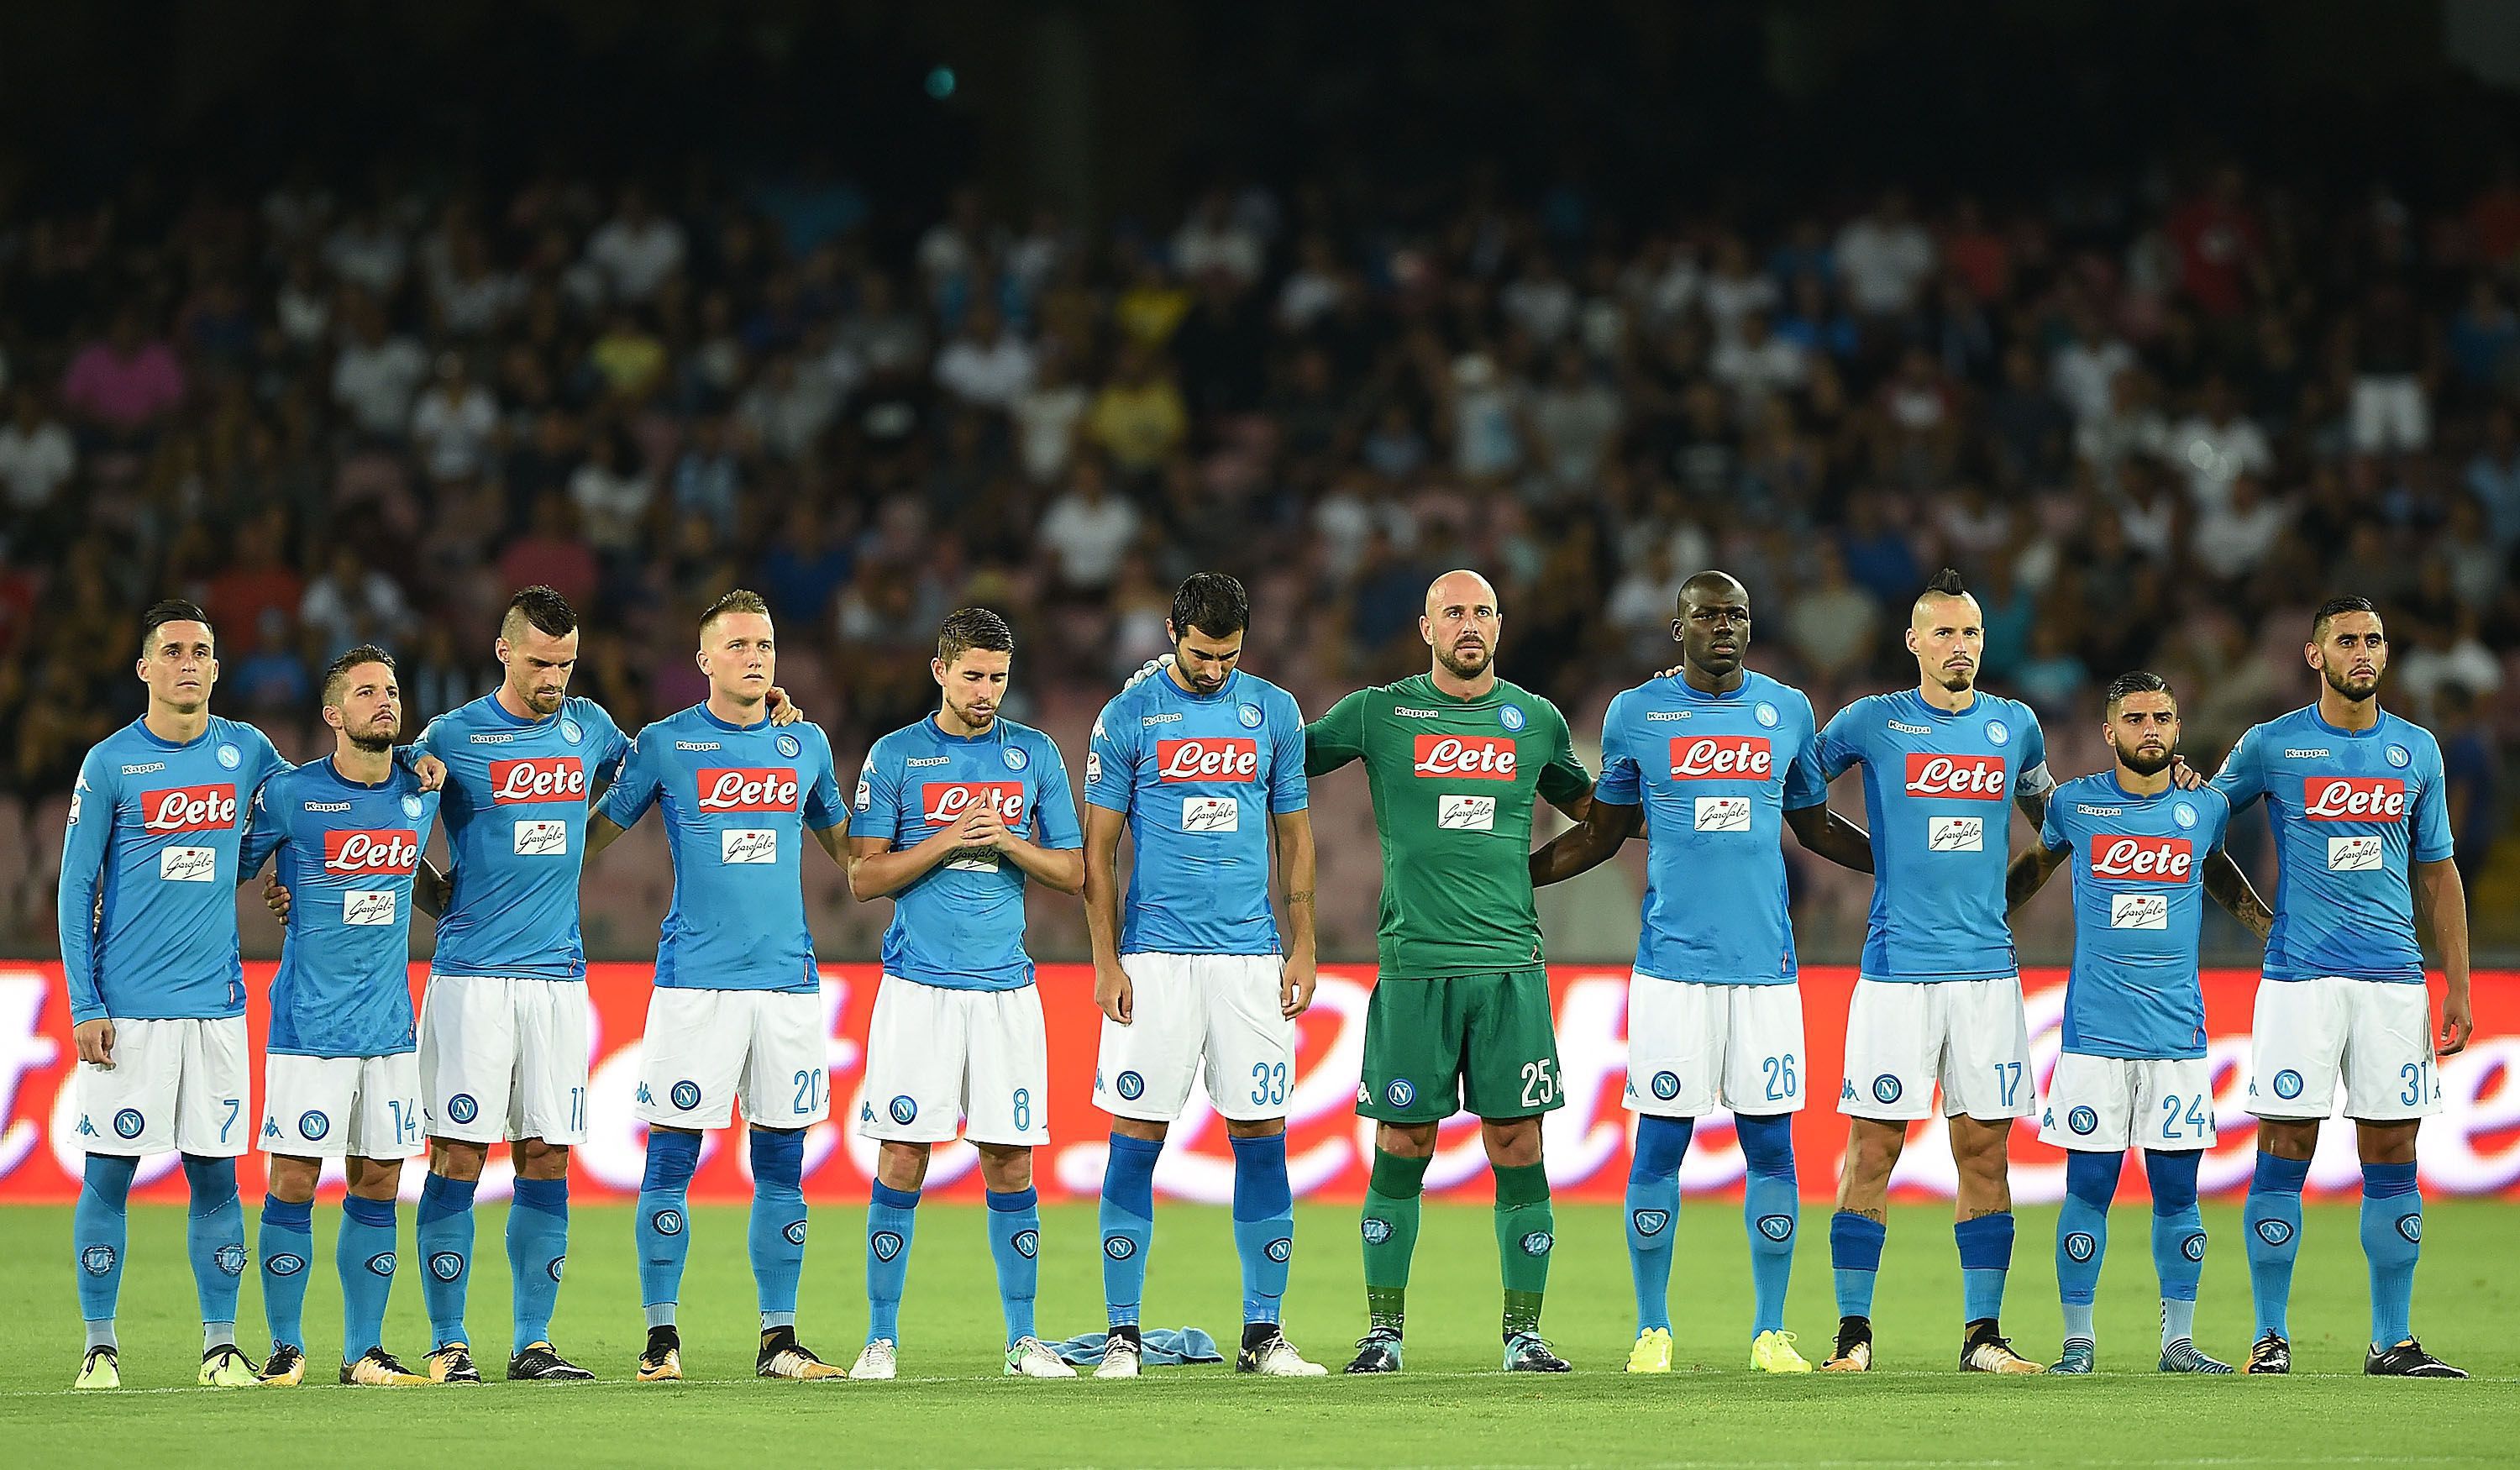 Ssc Napoli Wallpapers Hd - Huddle , HD Wallpaper & Backgrounds